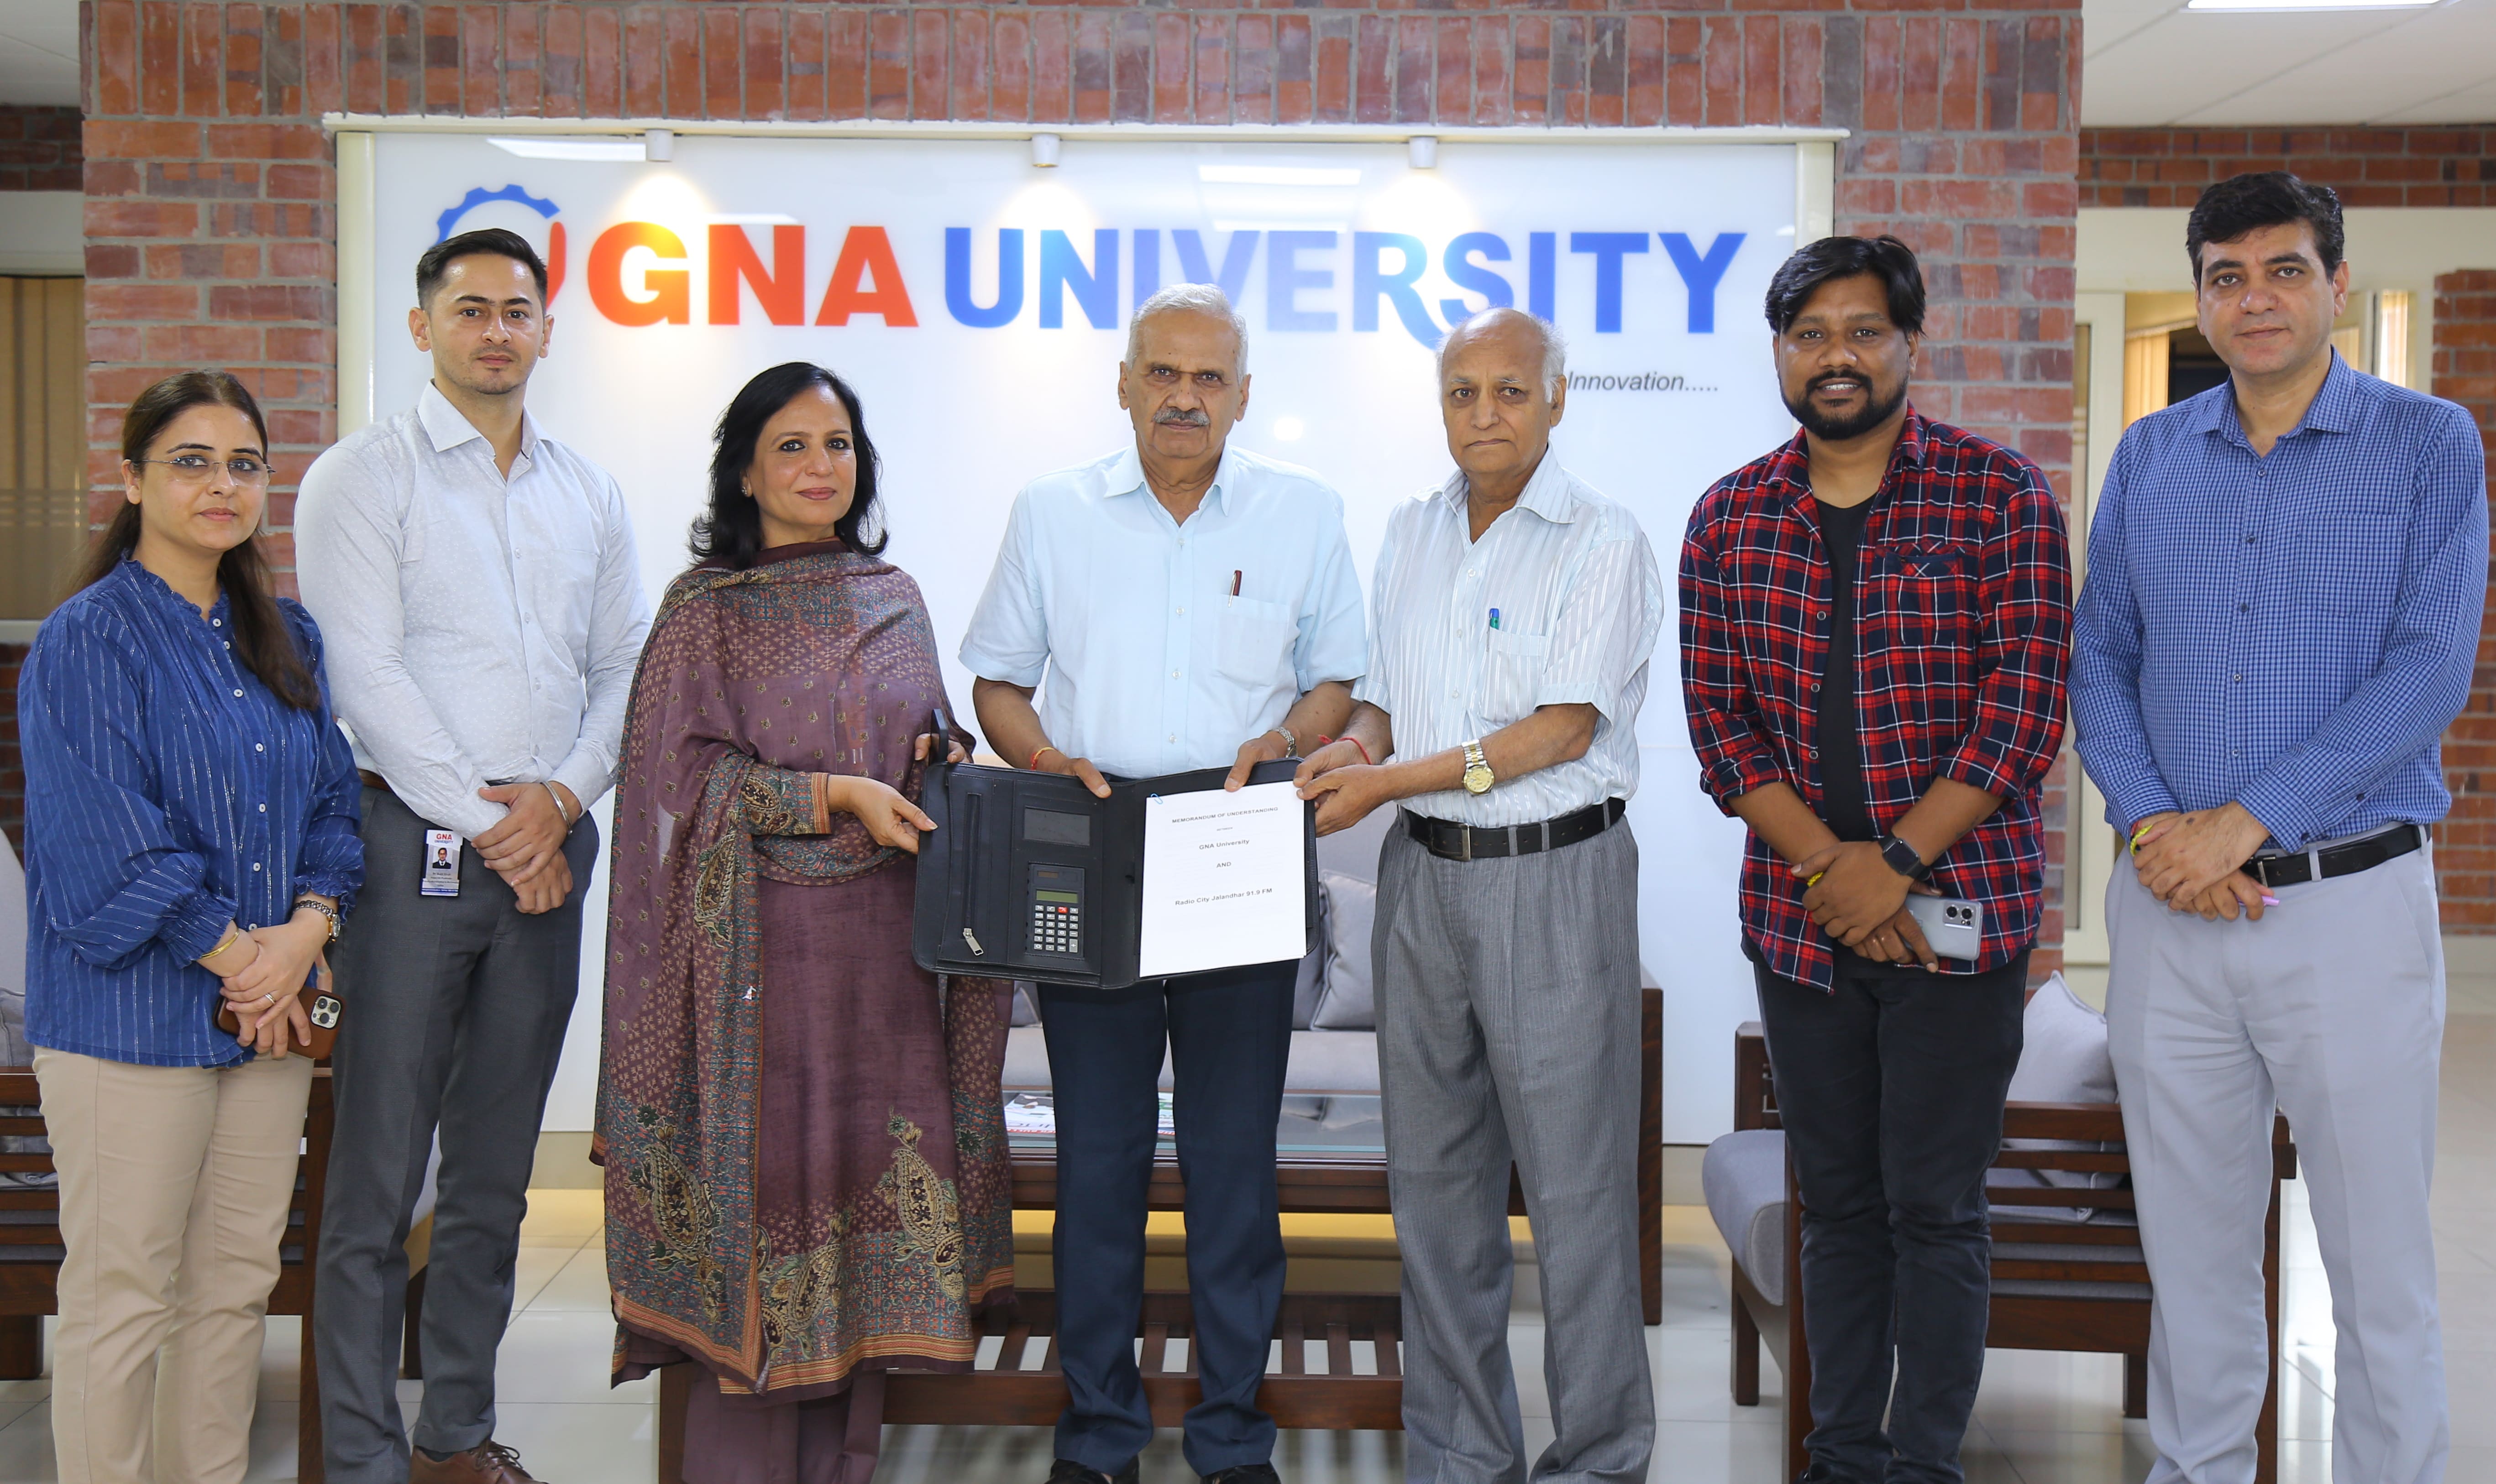 MOU Understanding Signed Between GNA University and Radio City 91.9 FM